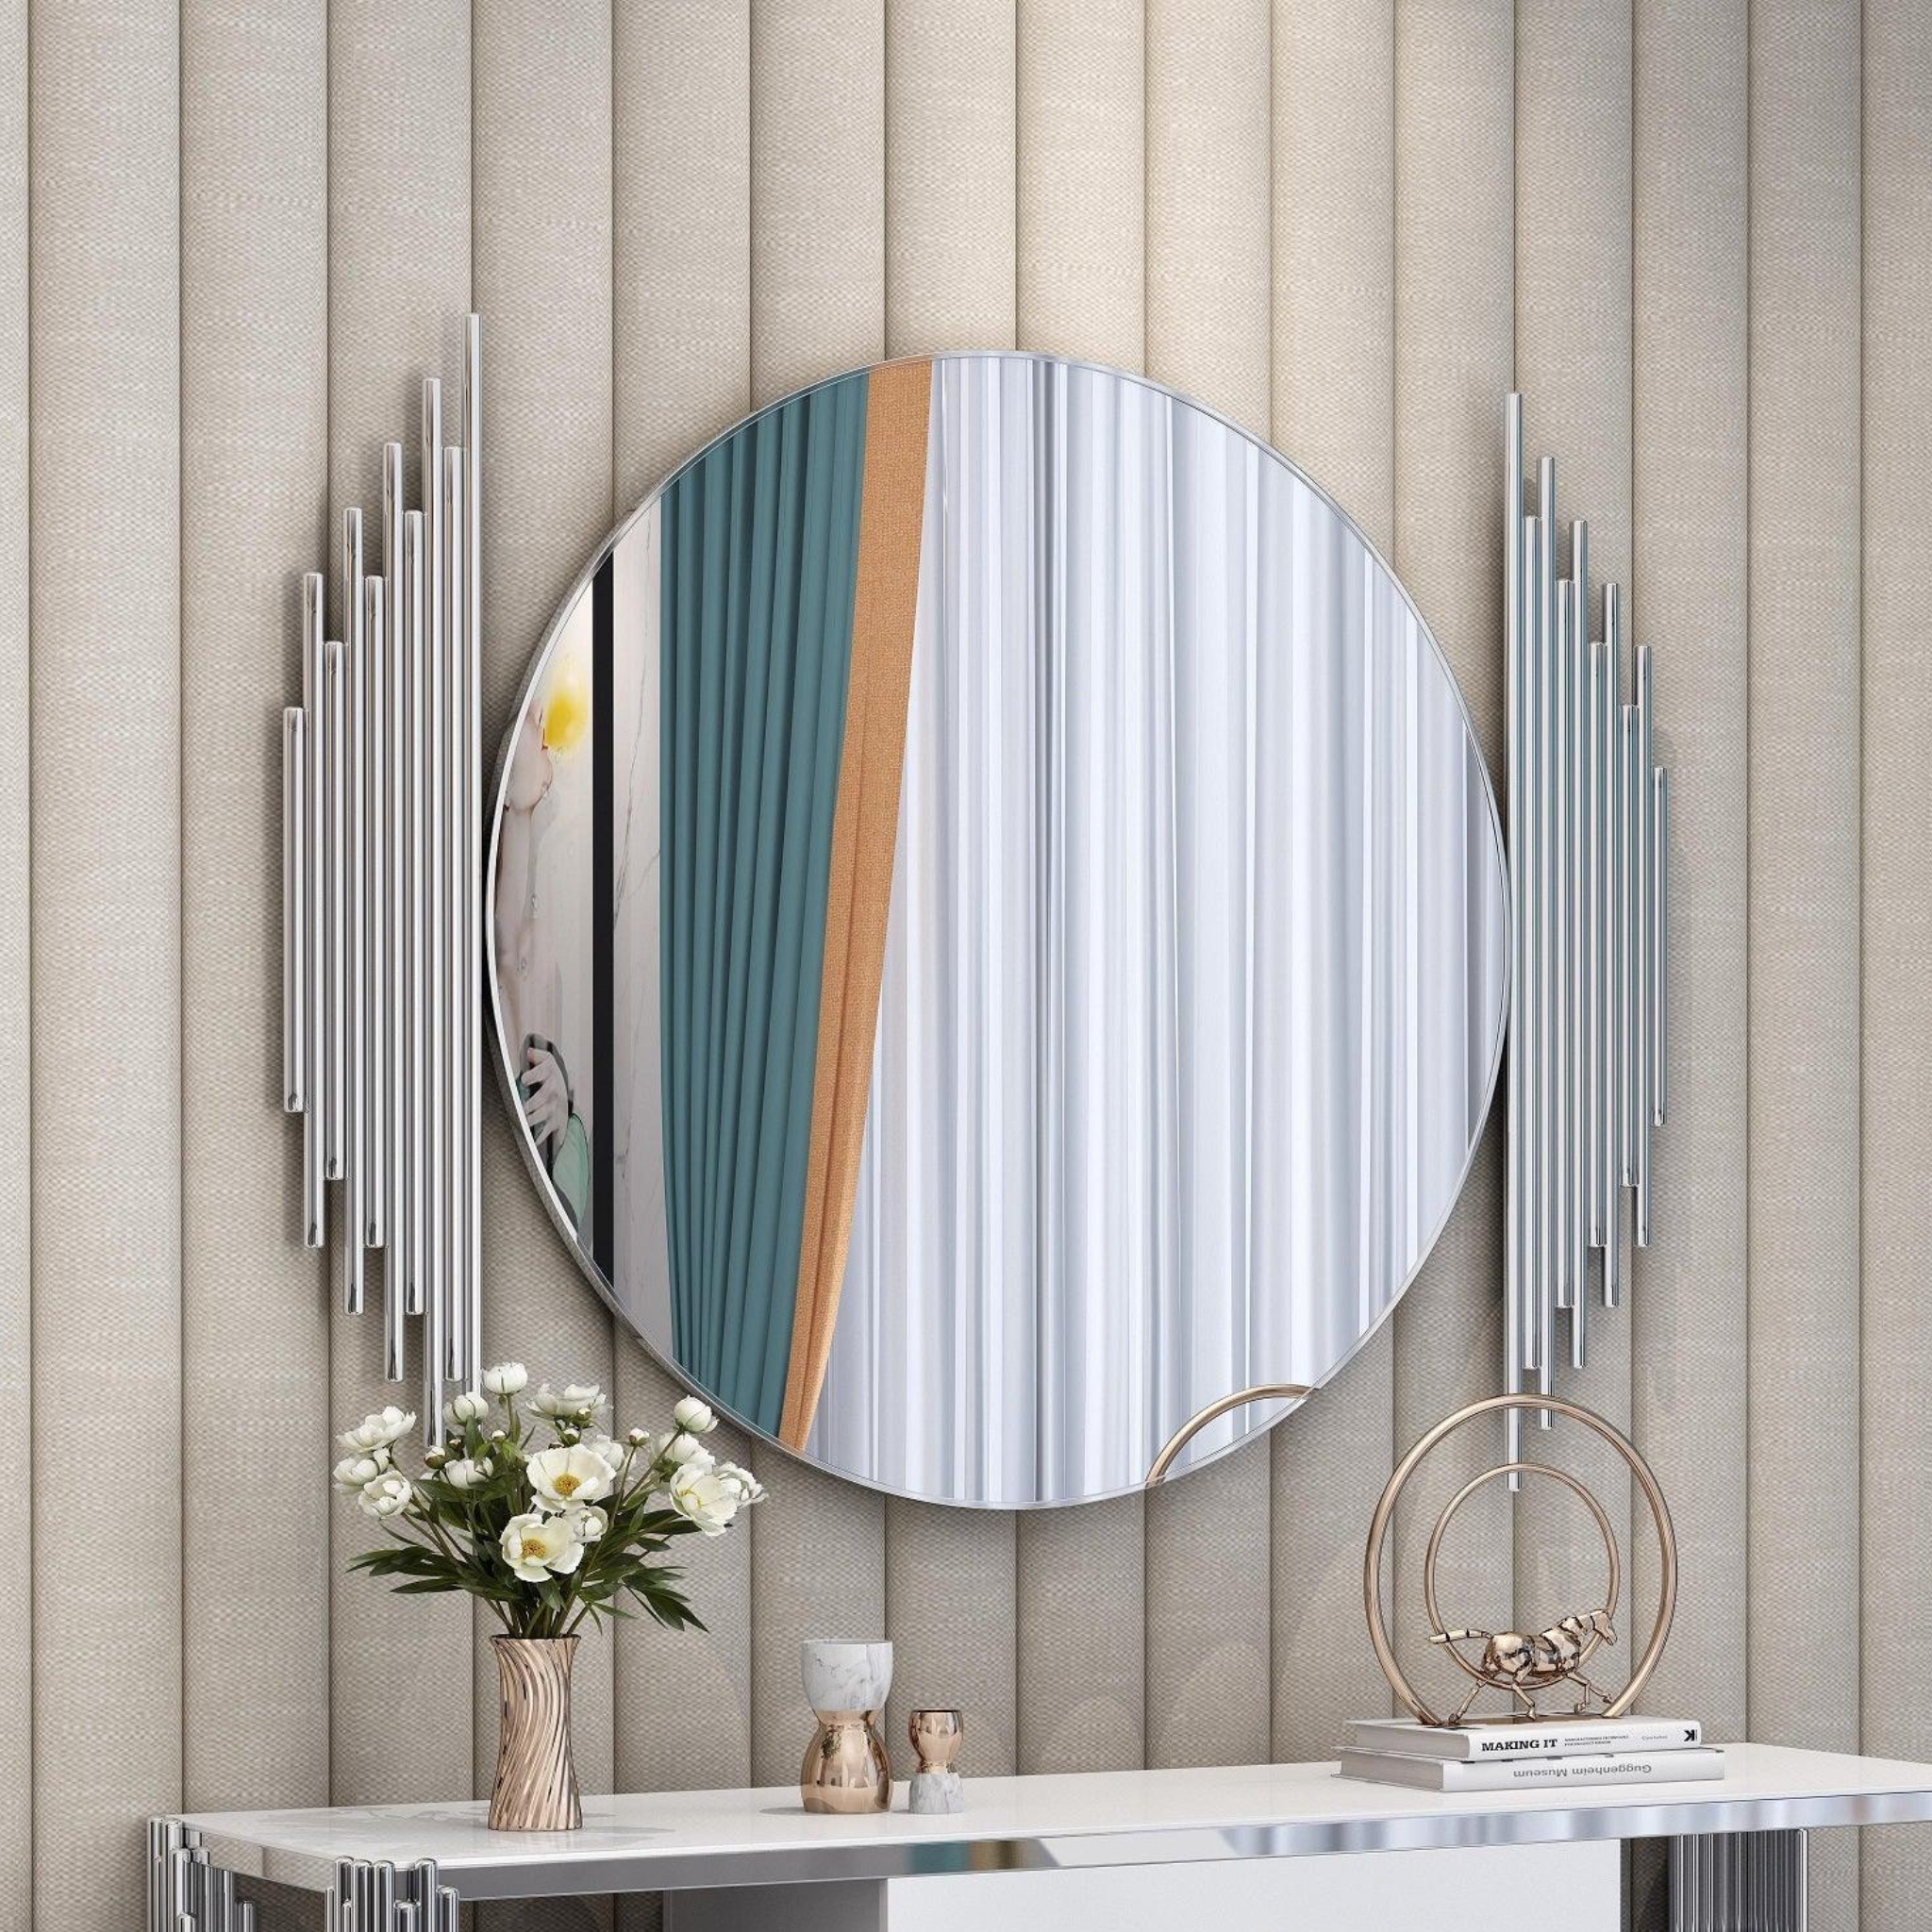 Douglas Wall Mirror. Round mirror with a silver frame, hanging on a wall. Modern home decor. 